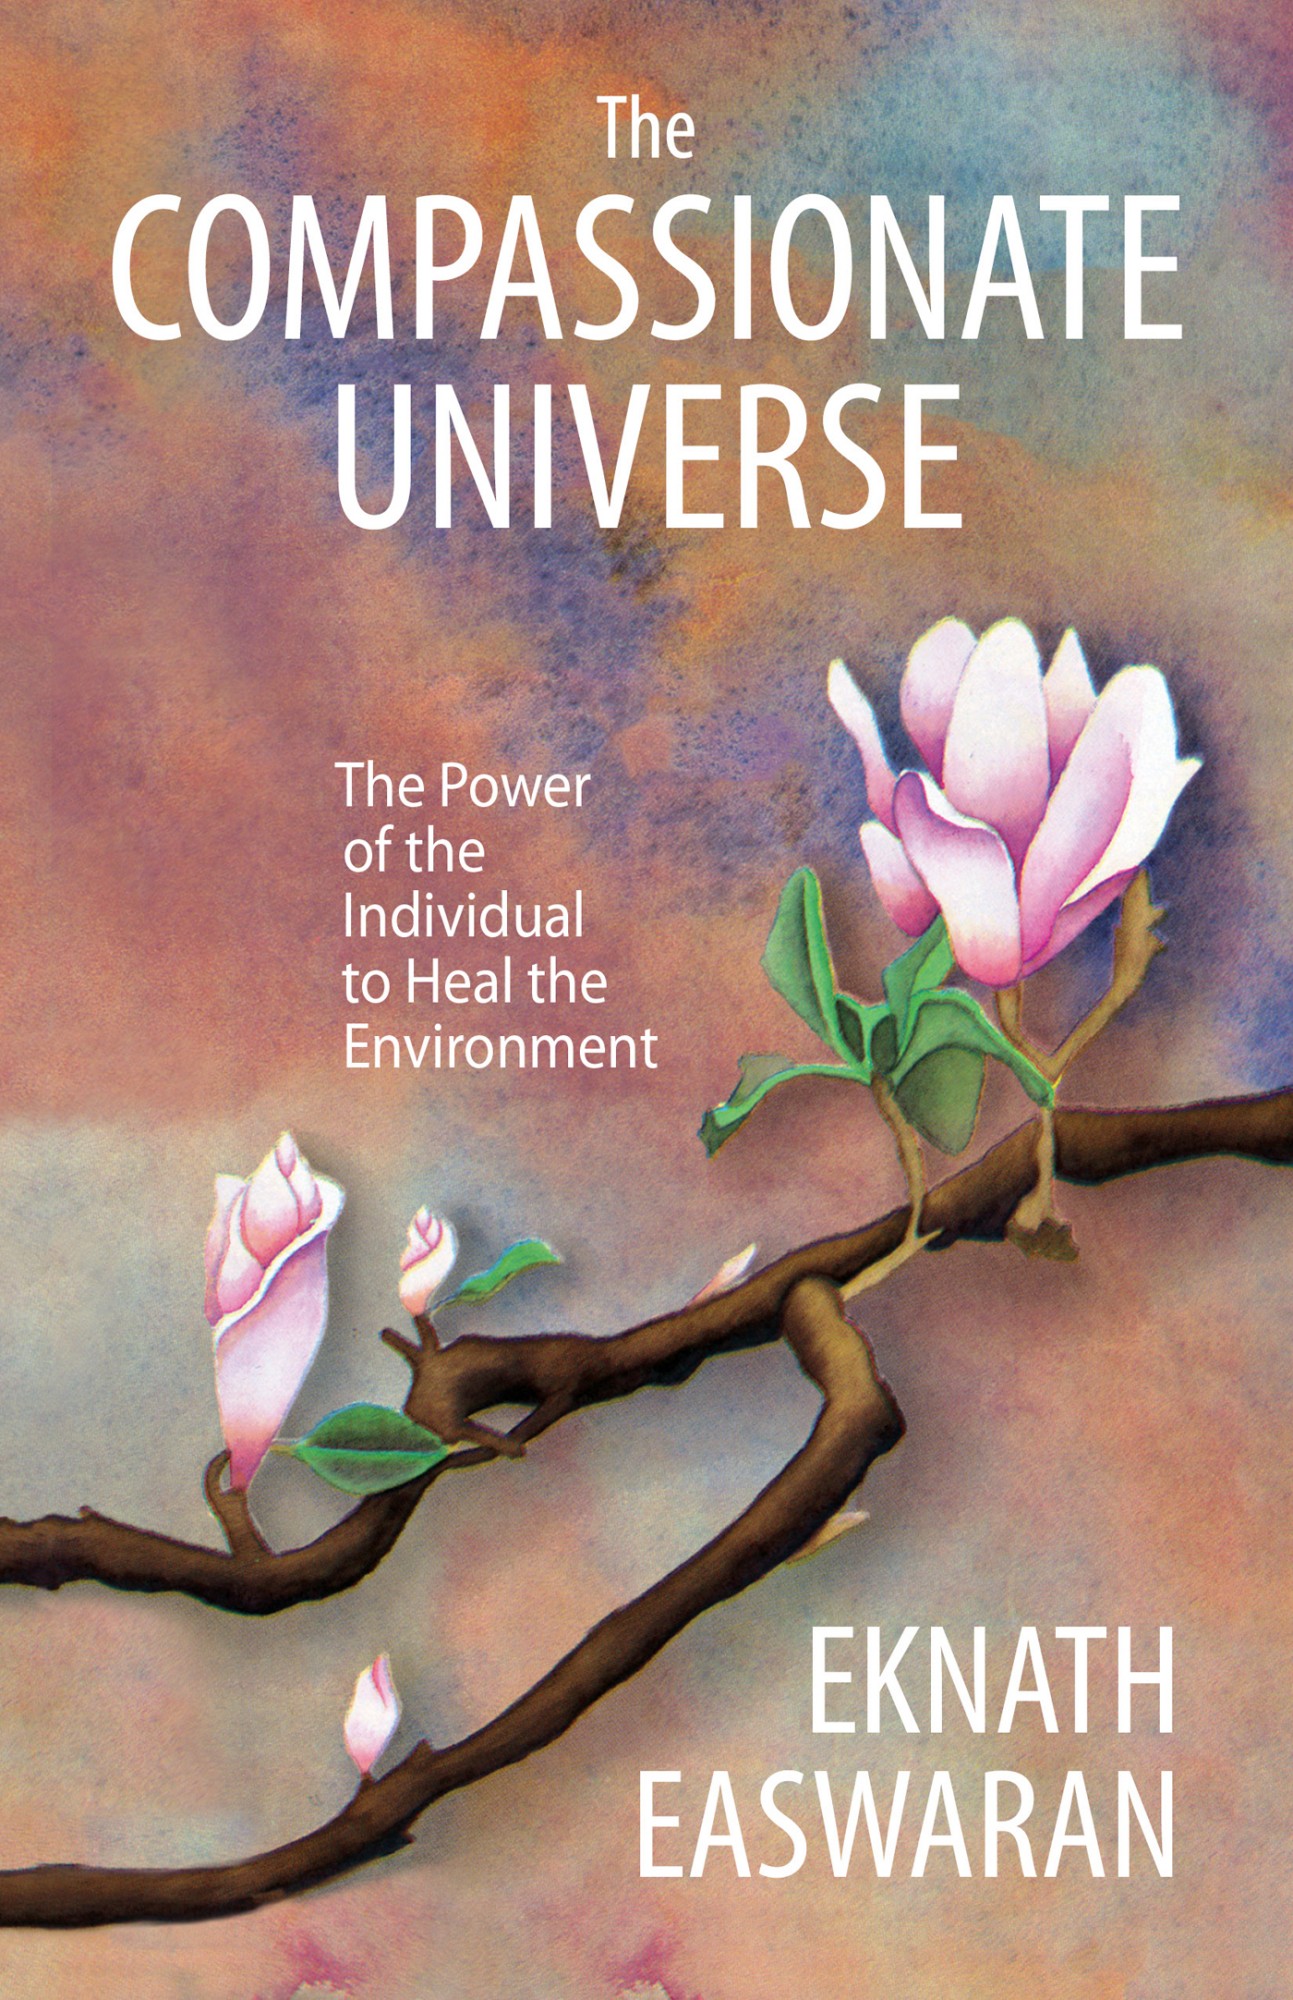 The Compassionate Universe The Power of the Individual to Heal the Environment - image 1